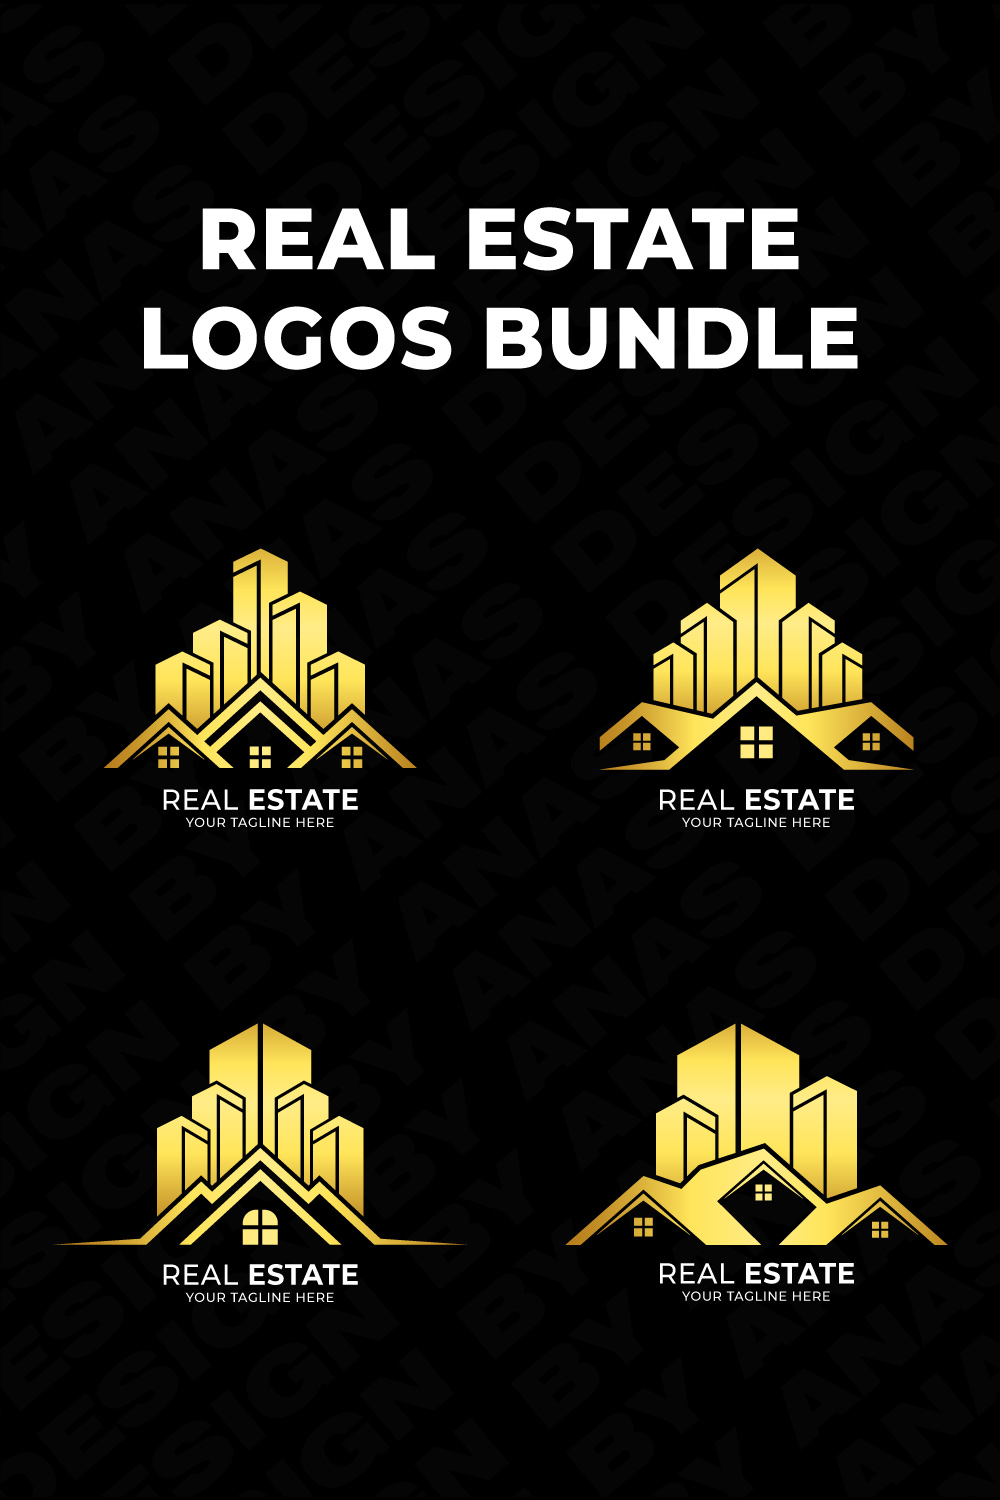 4 Luxury Real Estate Logos Design, Building Logos Bundle Template – ONLY $20 pinterest preview image.